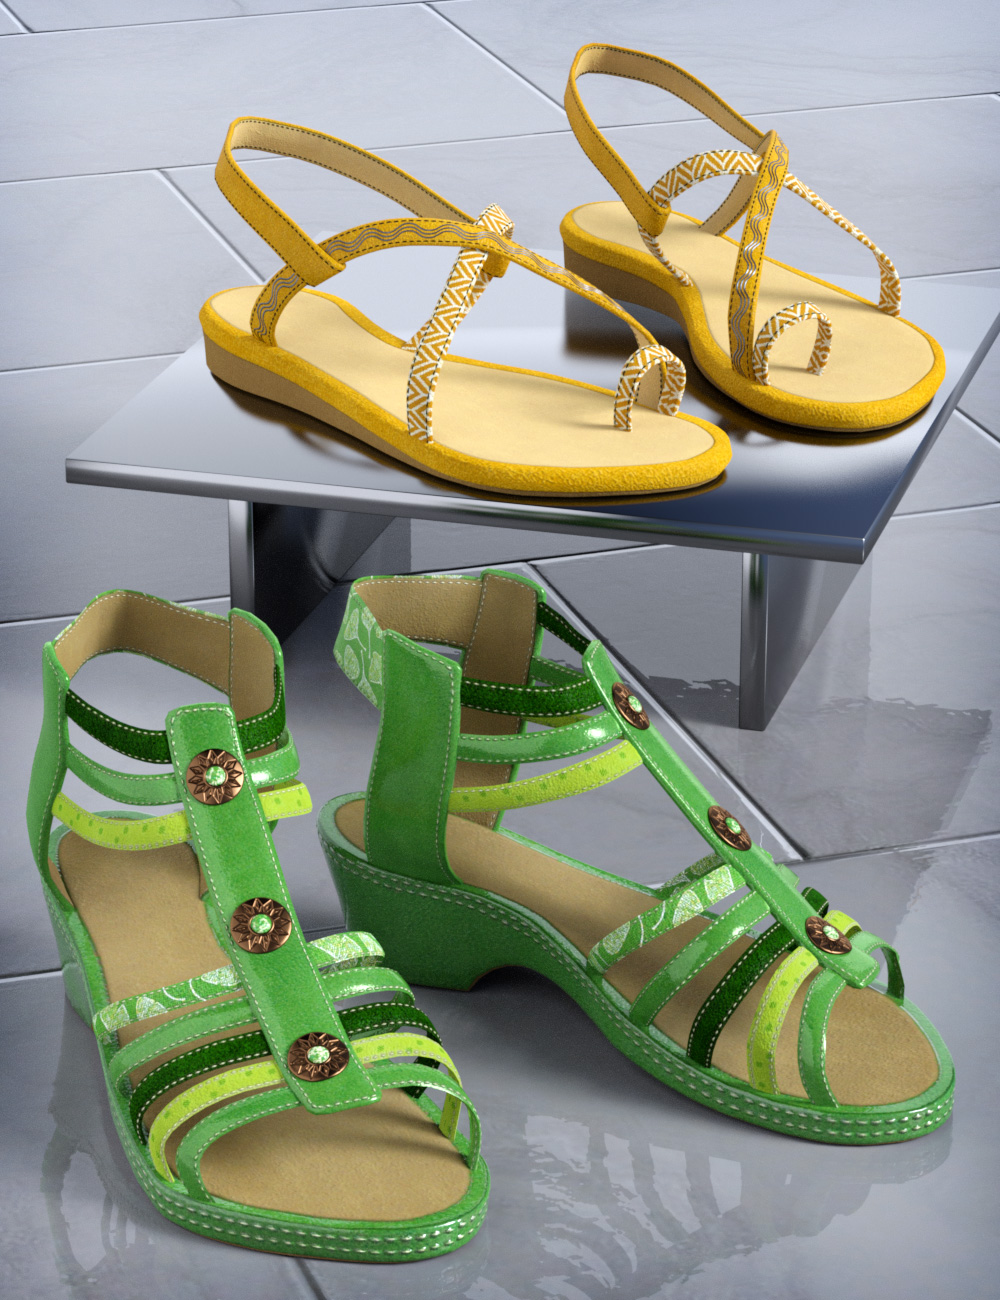 Fun Textures for Patchwork Shoes 1 & 2 by: esha, 3D Models by Daz 3D